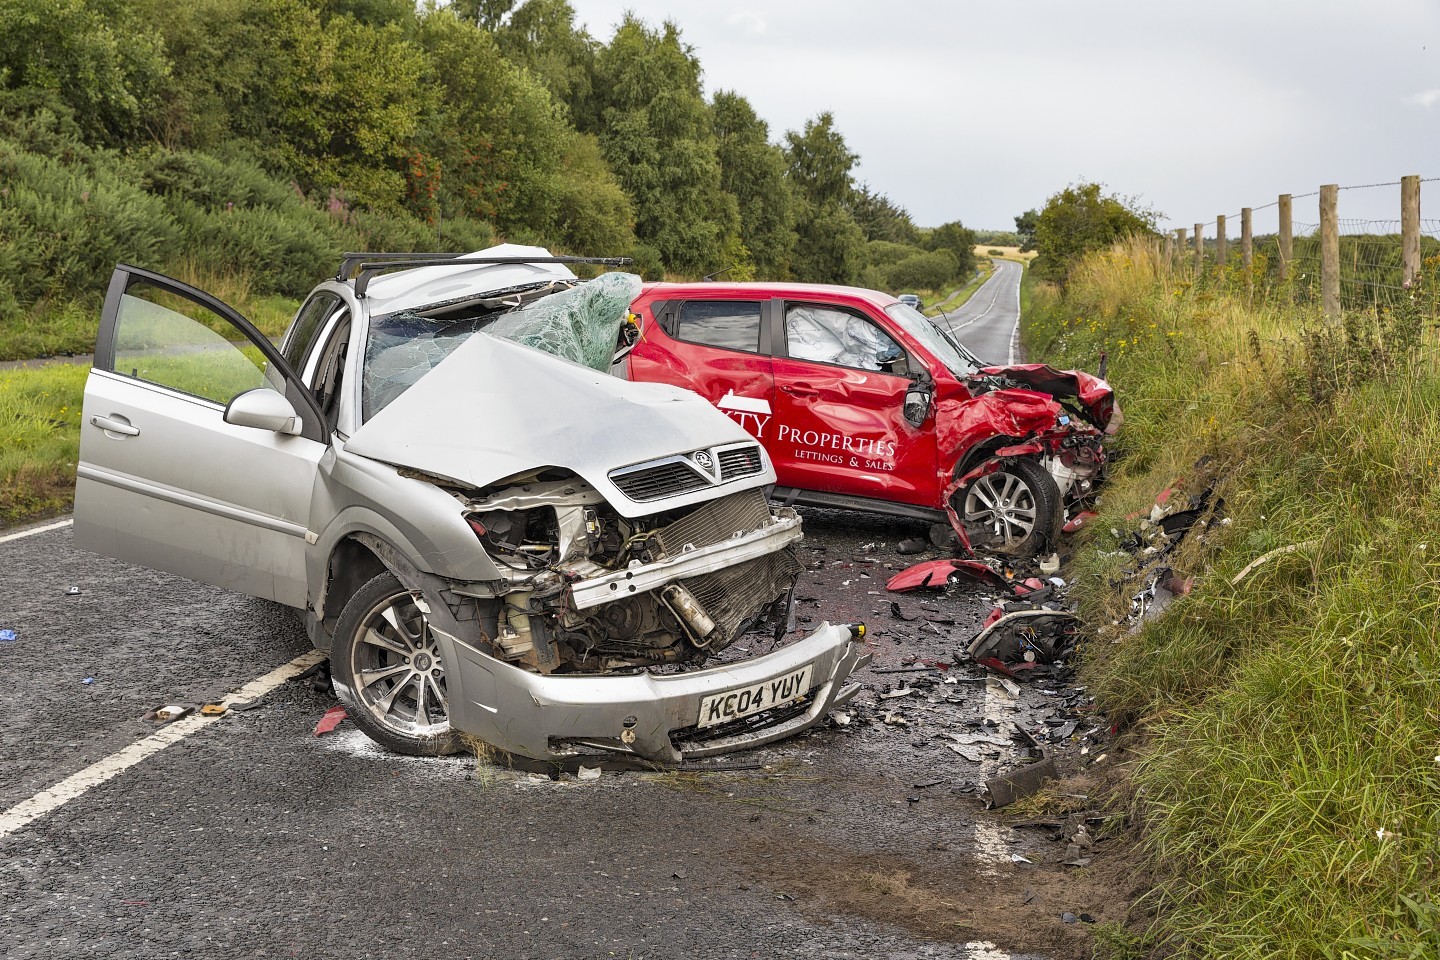 The silver Vauxhall Signum and red Nissan Juke involved in the crash